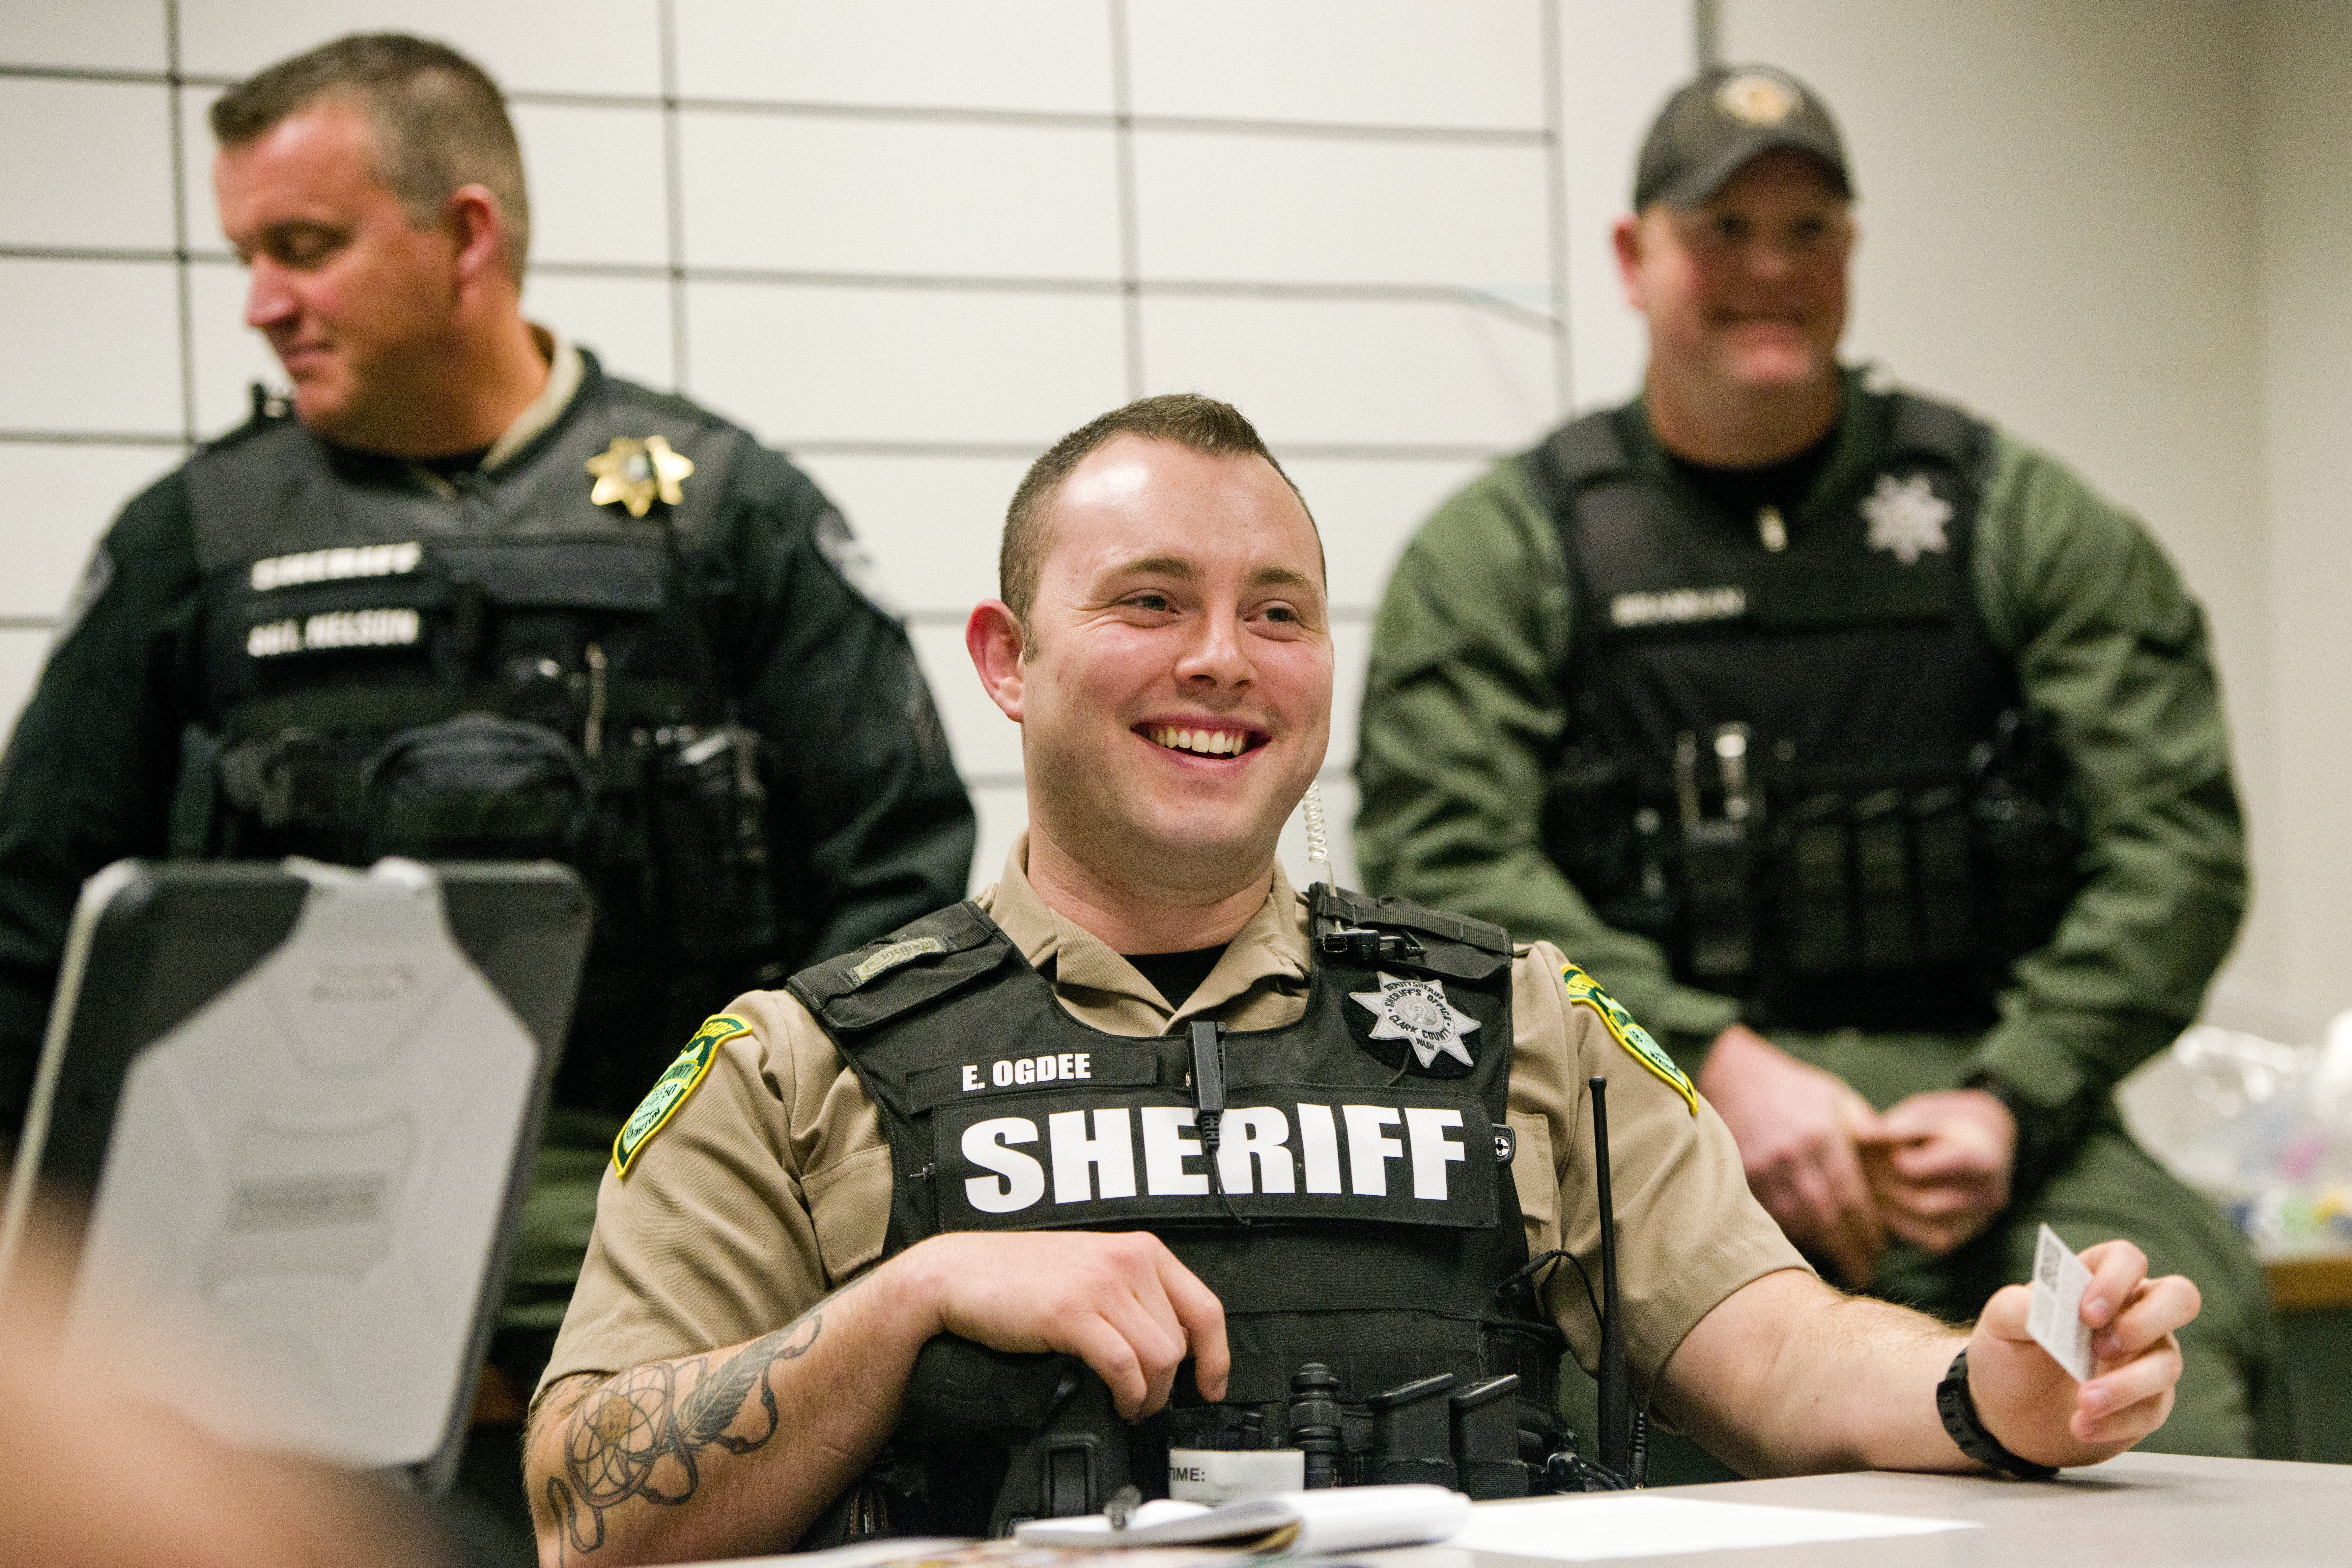 New Clark County Sheriff’s Deputy Ethan Ogdee, center, listens during a briefing before his graveyard shift. It took Ogdee more than a year to get hired, which isn’t atypical. While local agencies like the sheriff’s office are looking to ramp up their numbers, one of the things working against them is the lengthy hiring process.